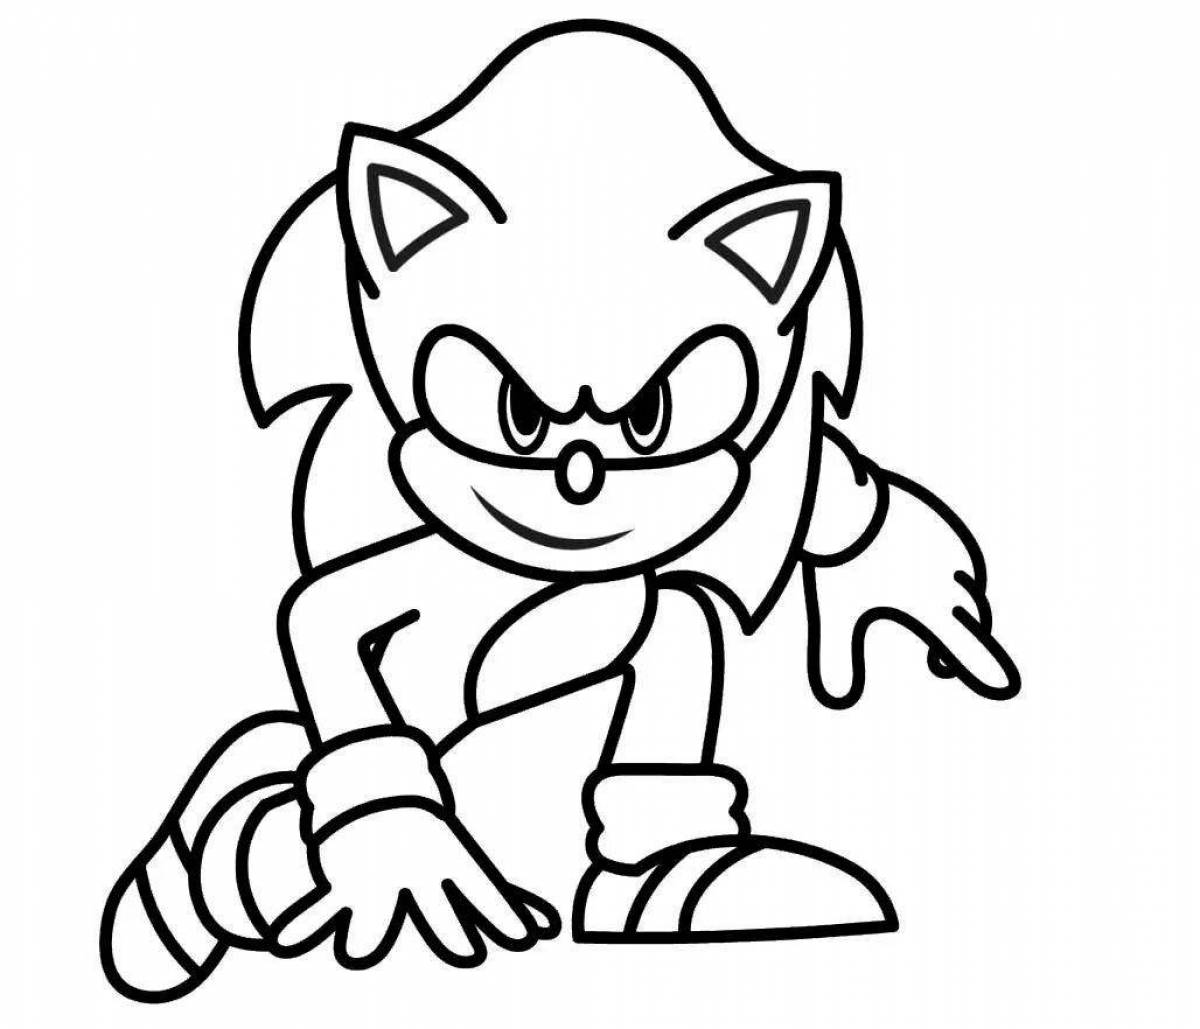 Amazing sonic igze coloring book